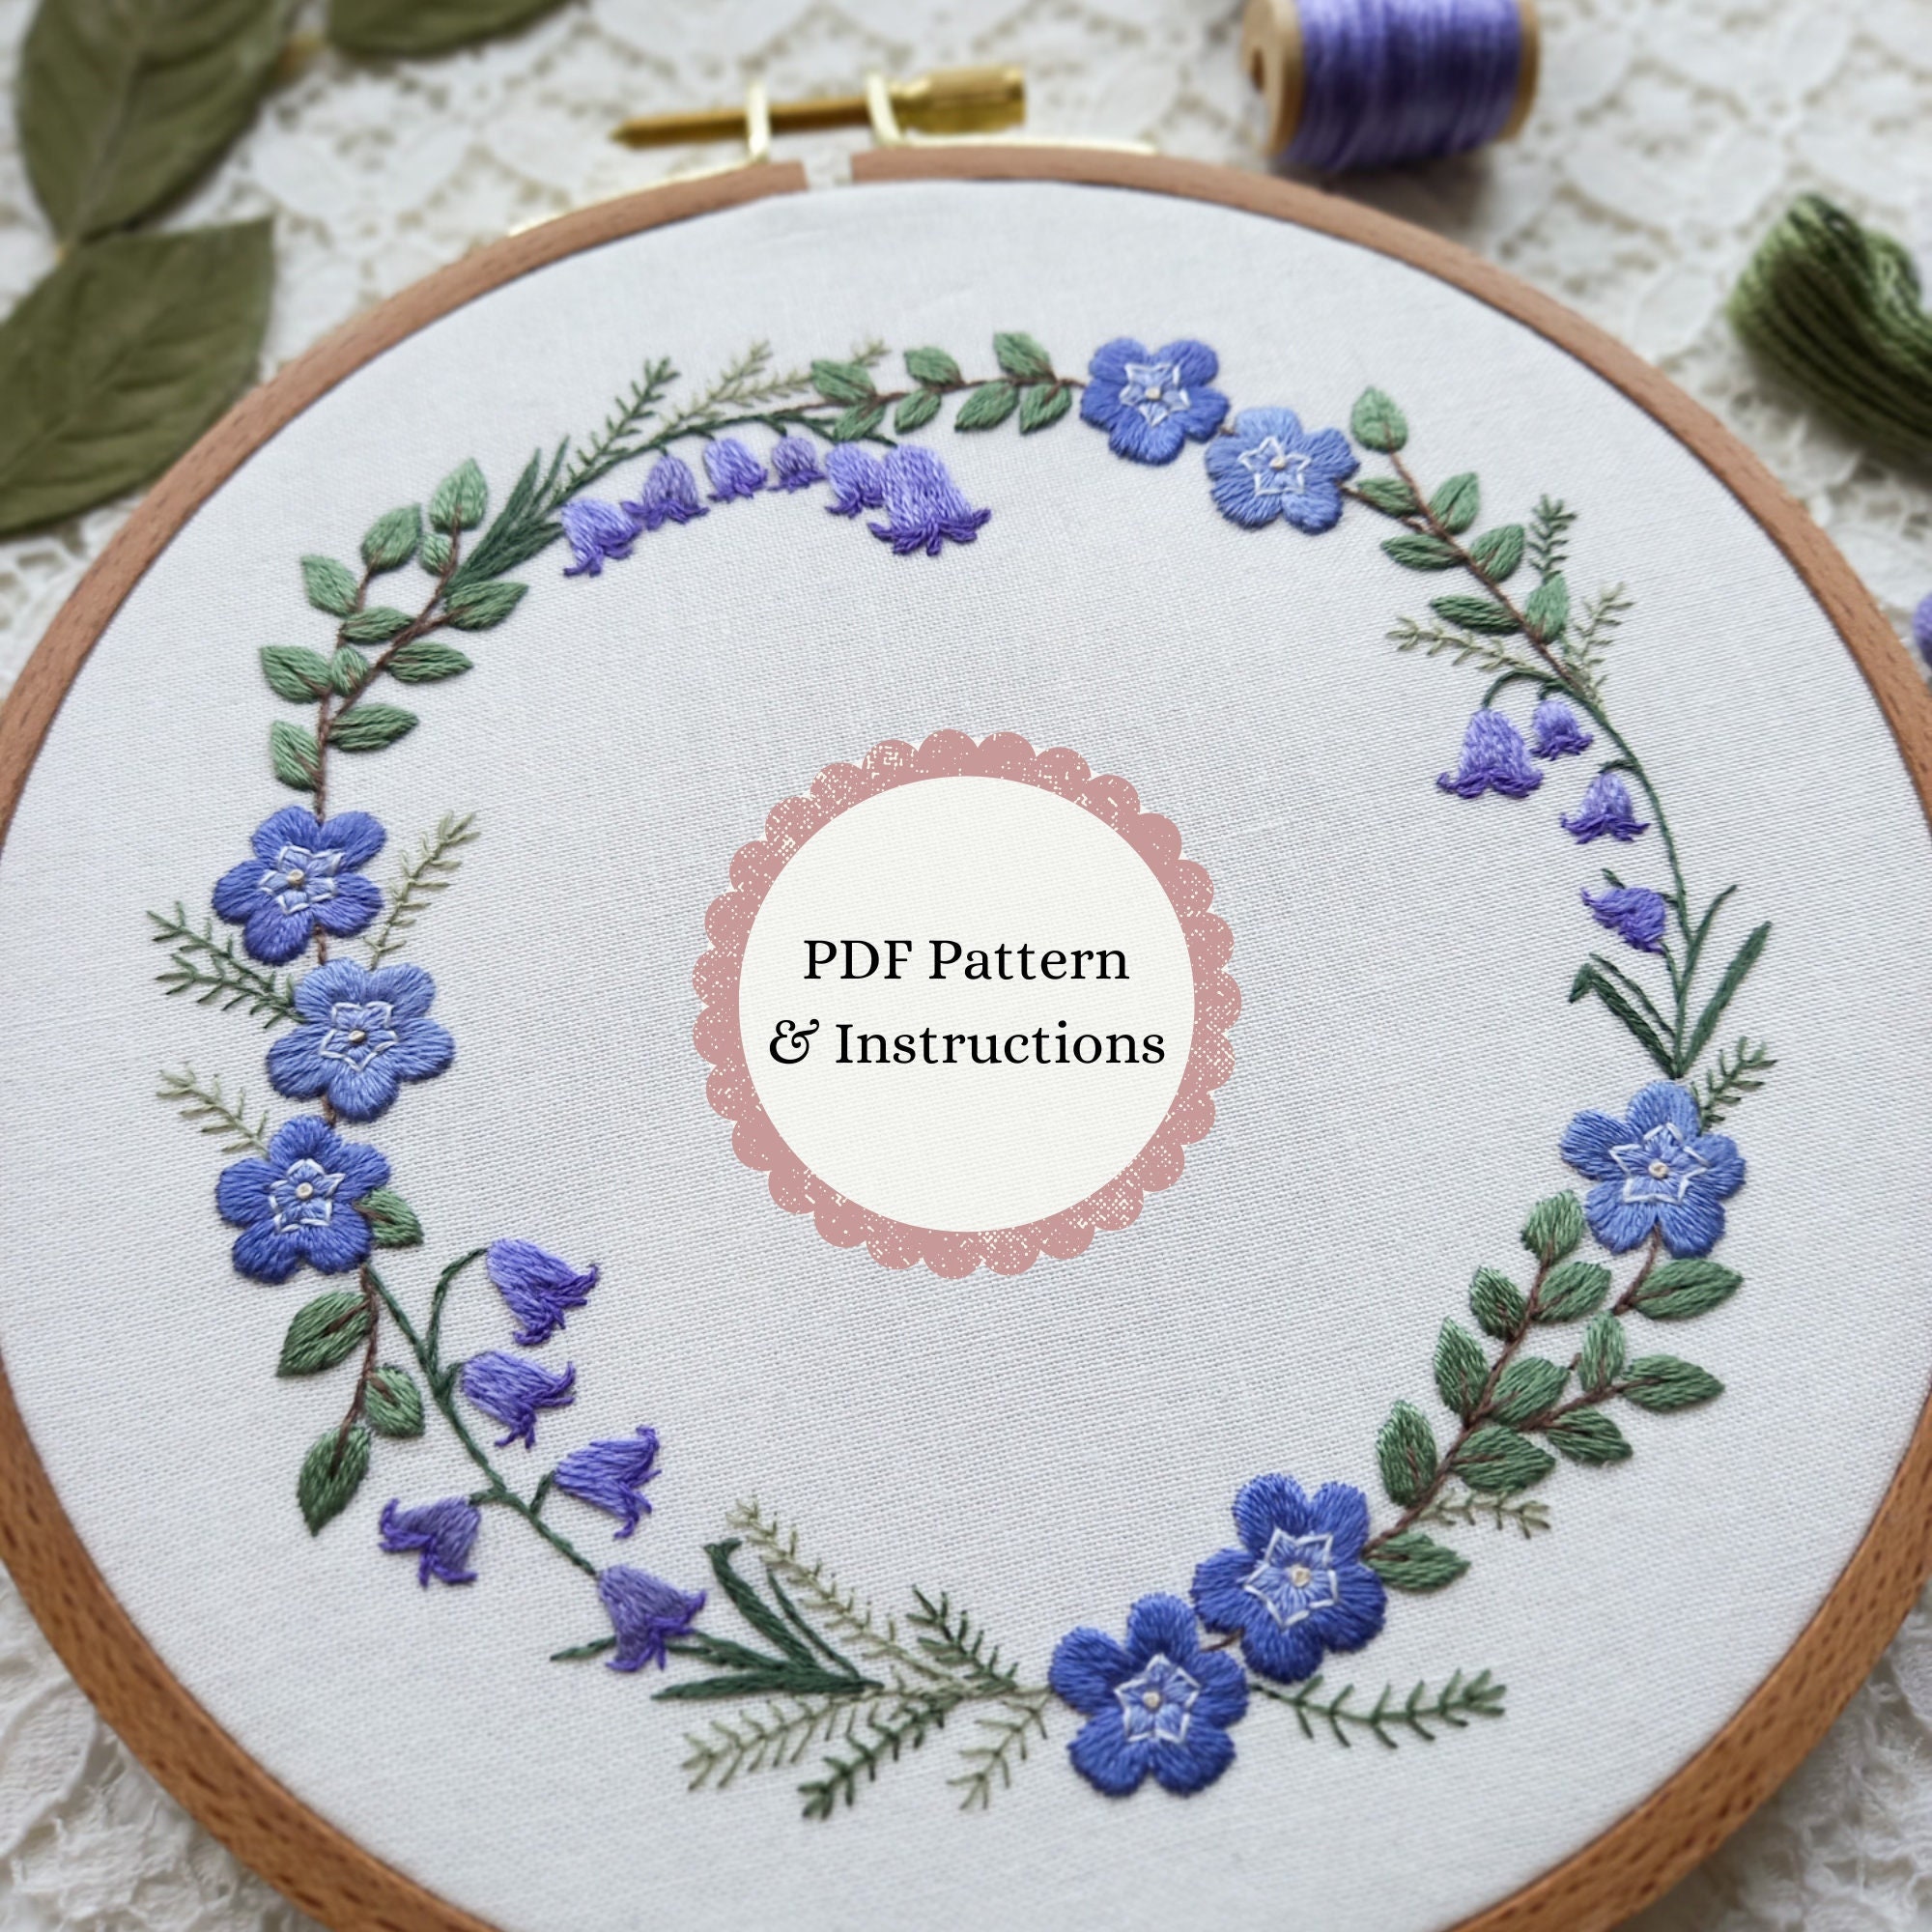 Periwinkle Duo” Embroidery Kit - Beginner and Intermediate